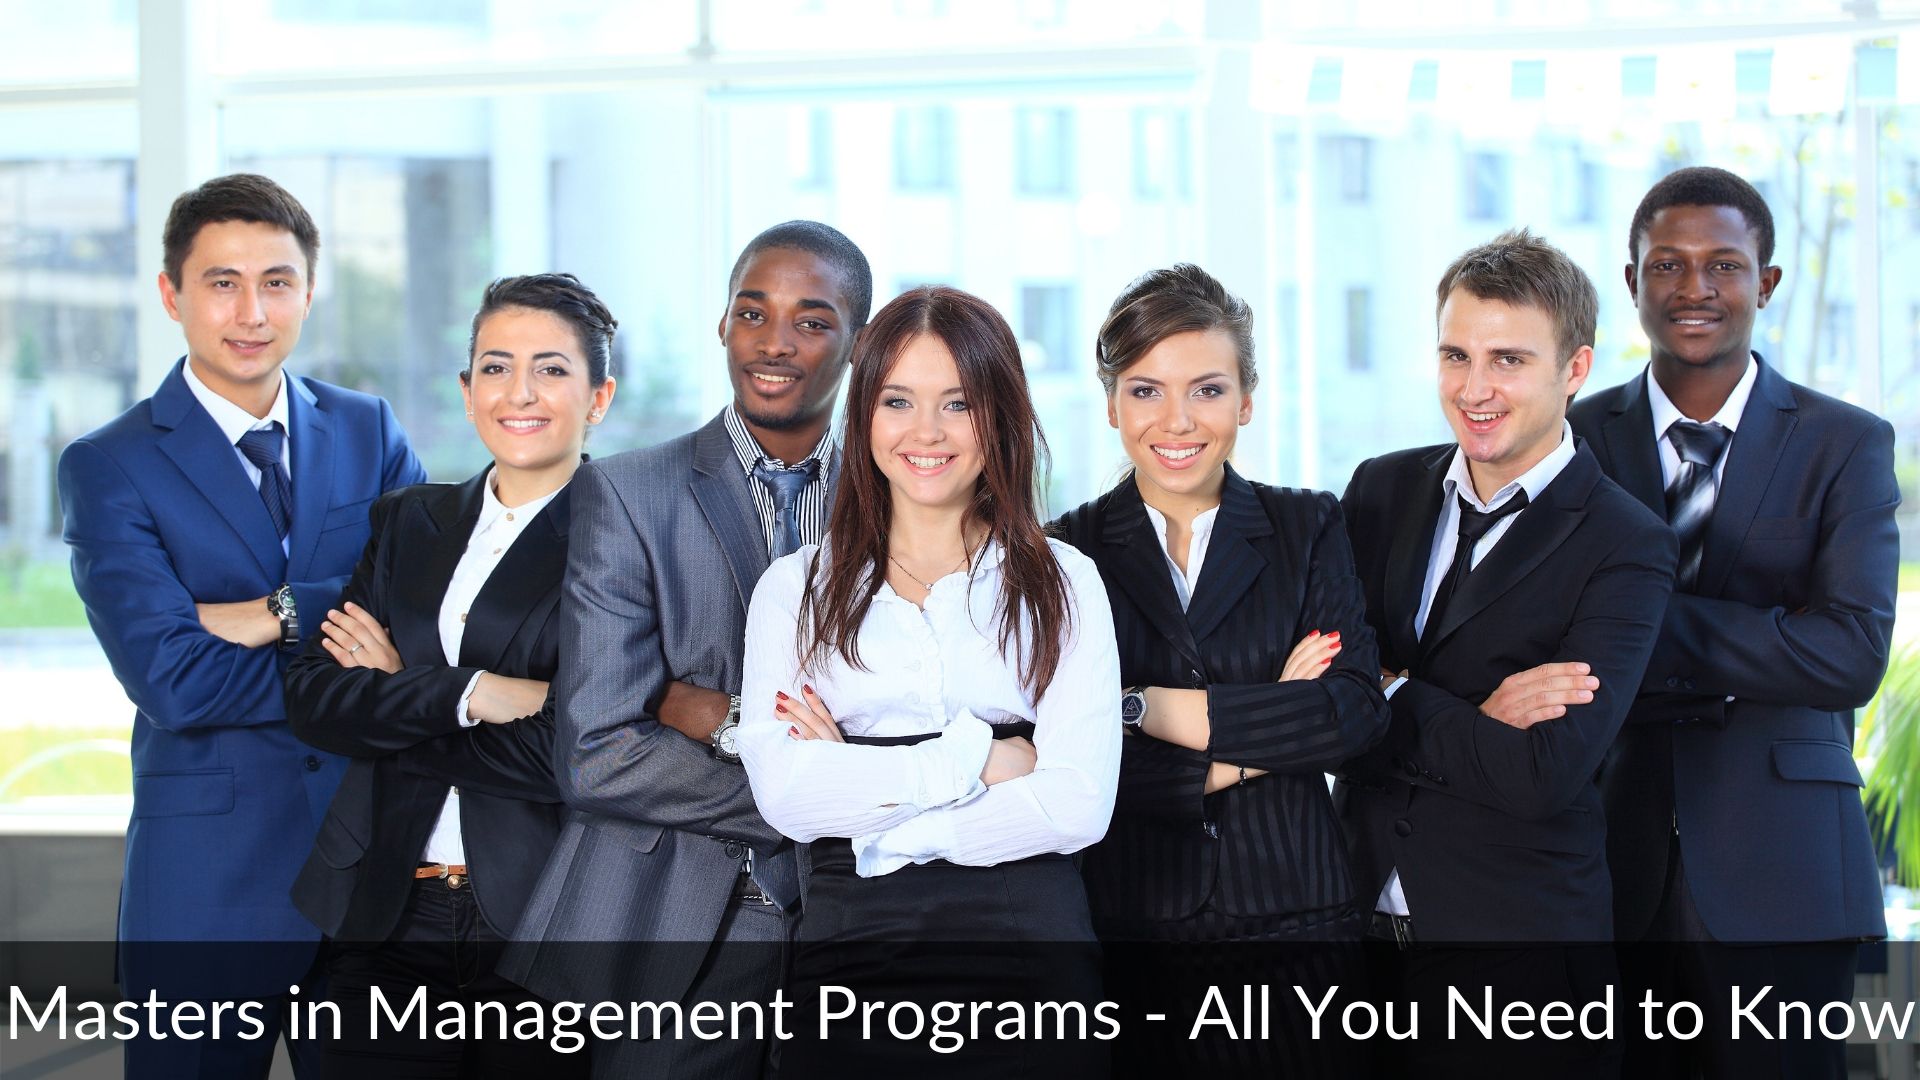 Masters in Management (MiM) Programs – All You Need to Know